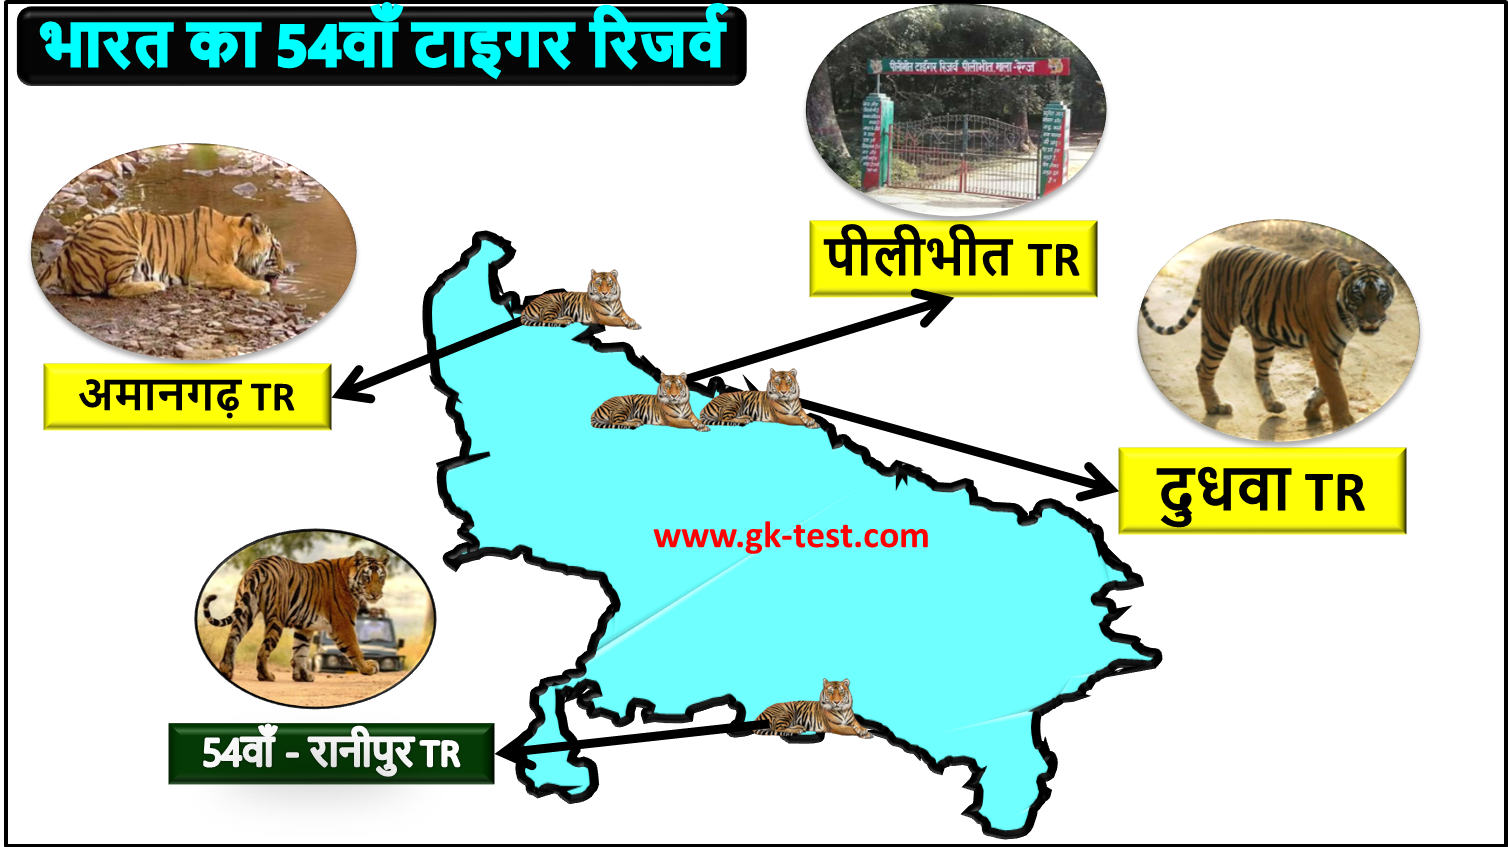 54th Tiger Reserves in India Map